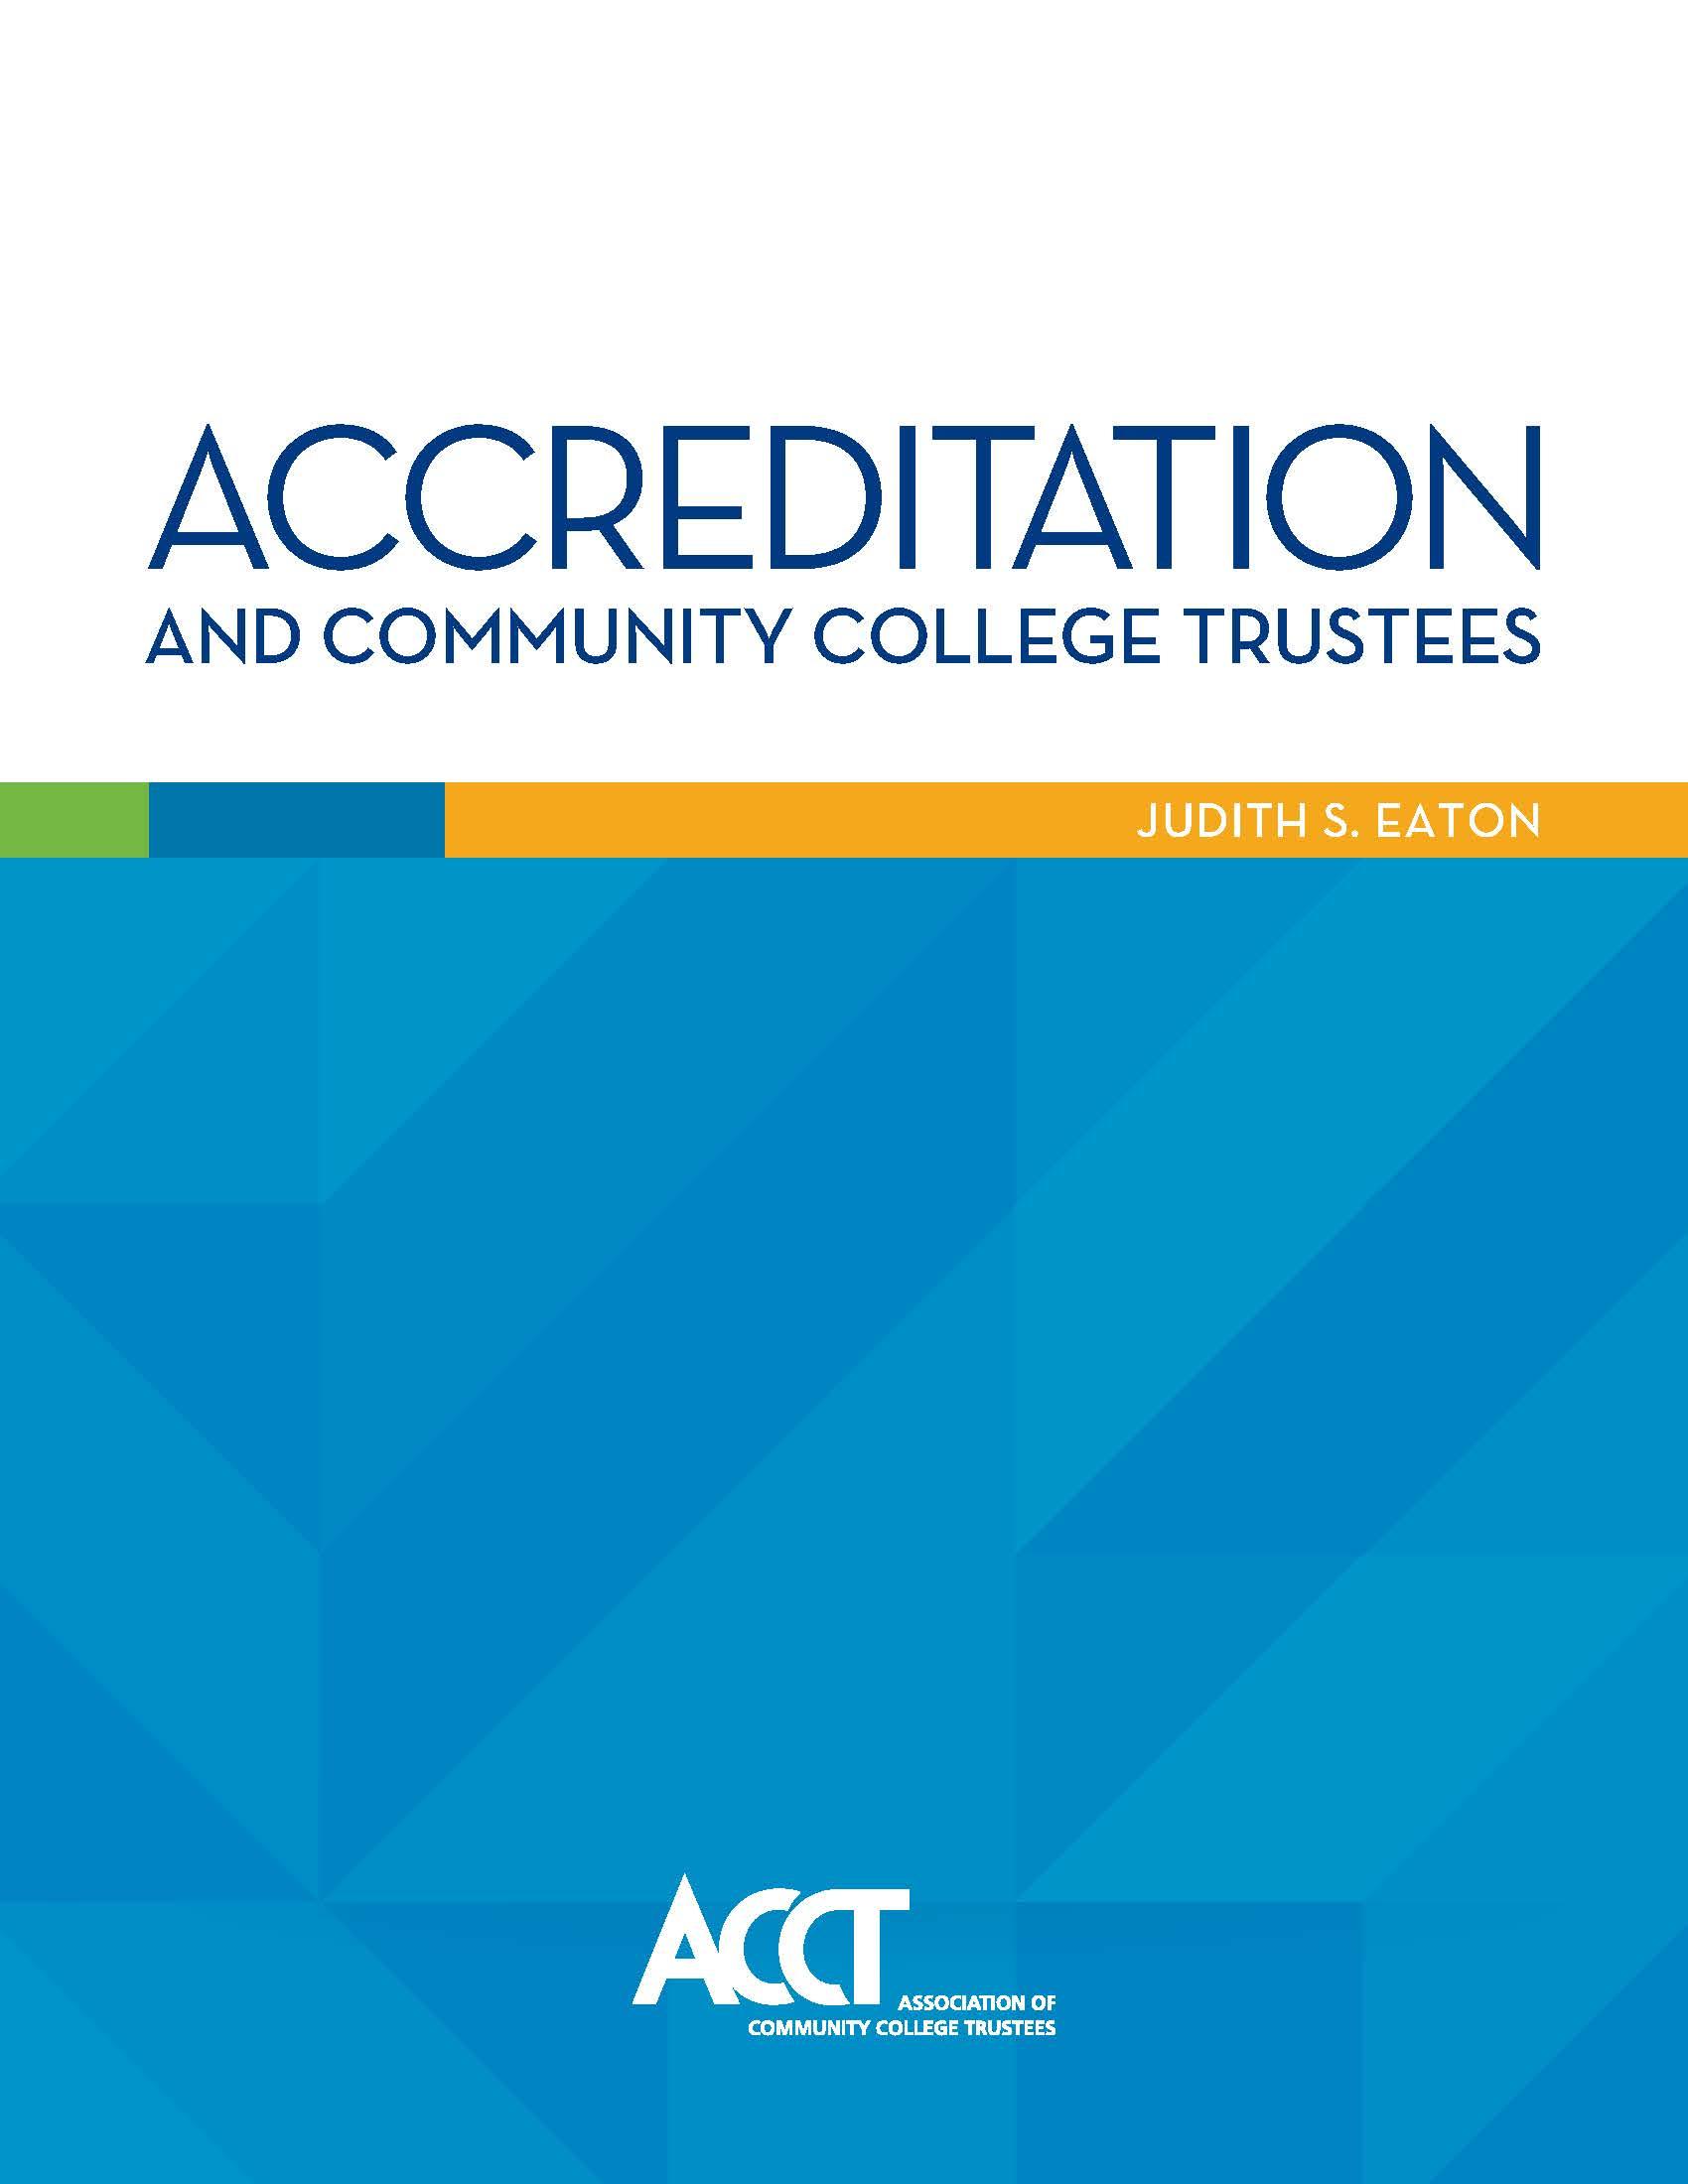 Accreditation in Community Colleges